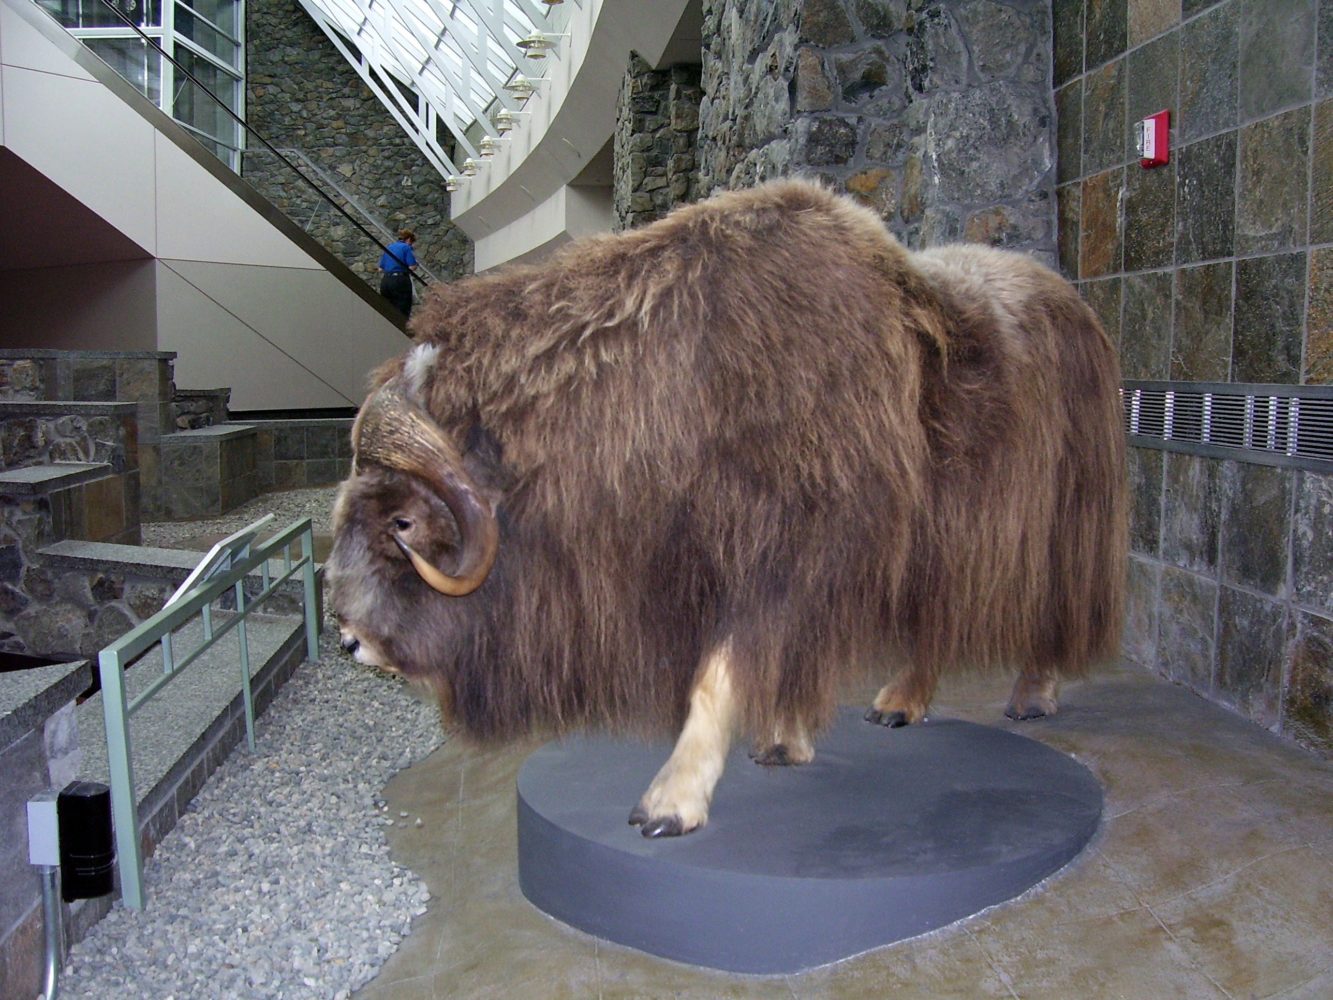 Musk Ox on display at Anchorage International Airport